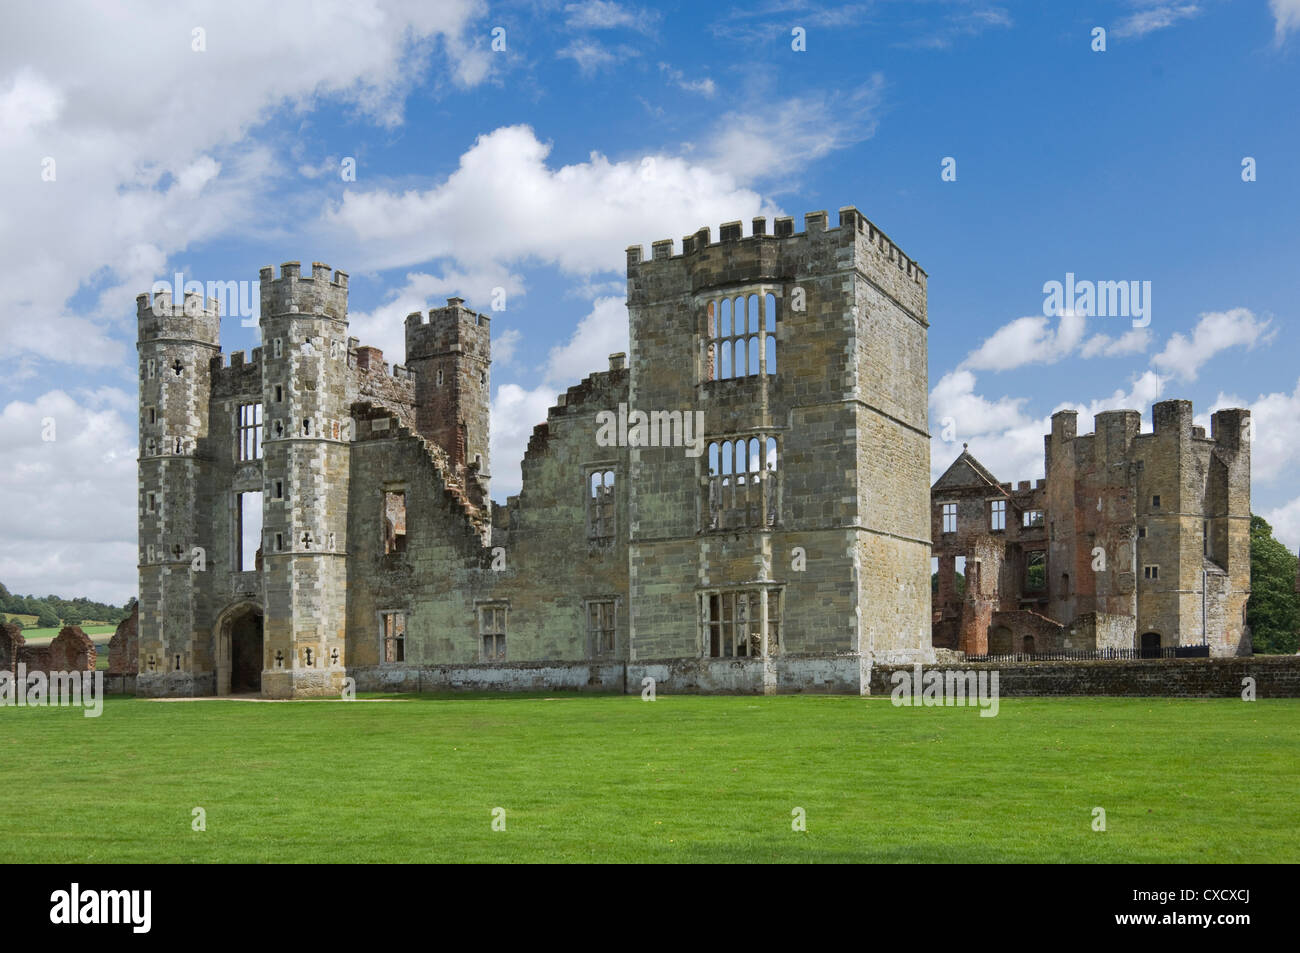 Cowdray Castle, dating from the 16th century, Midhurst, West Sussex, England, United Kingdom, Europe Stock Photo